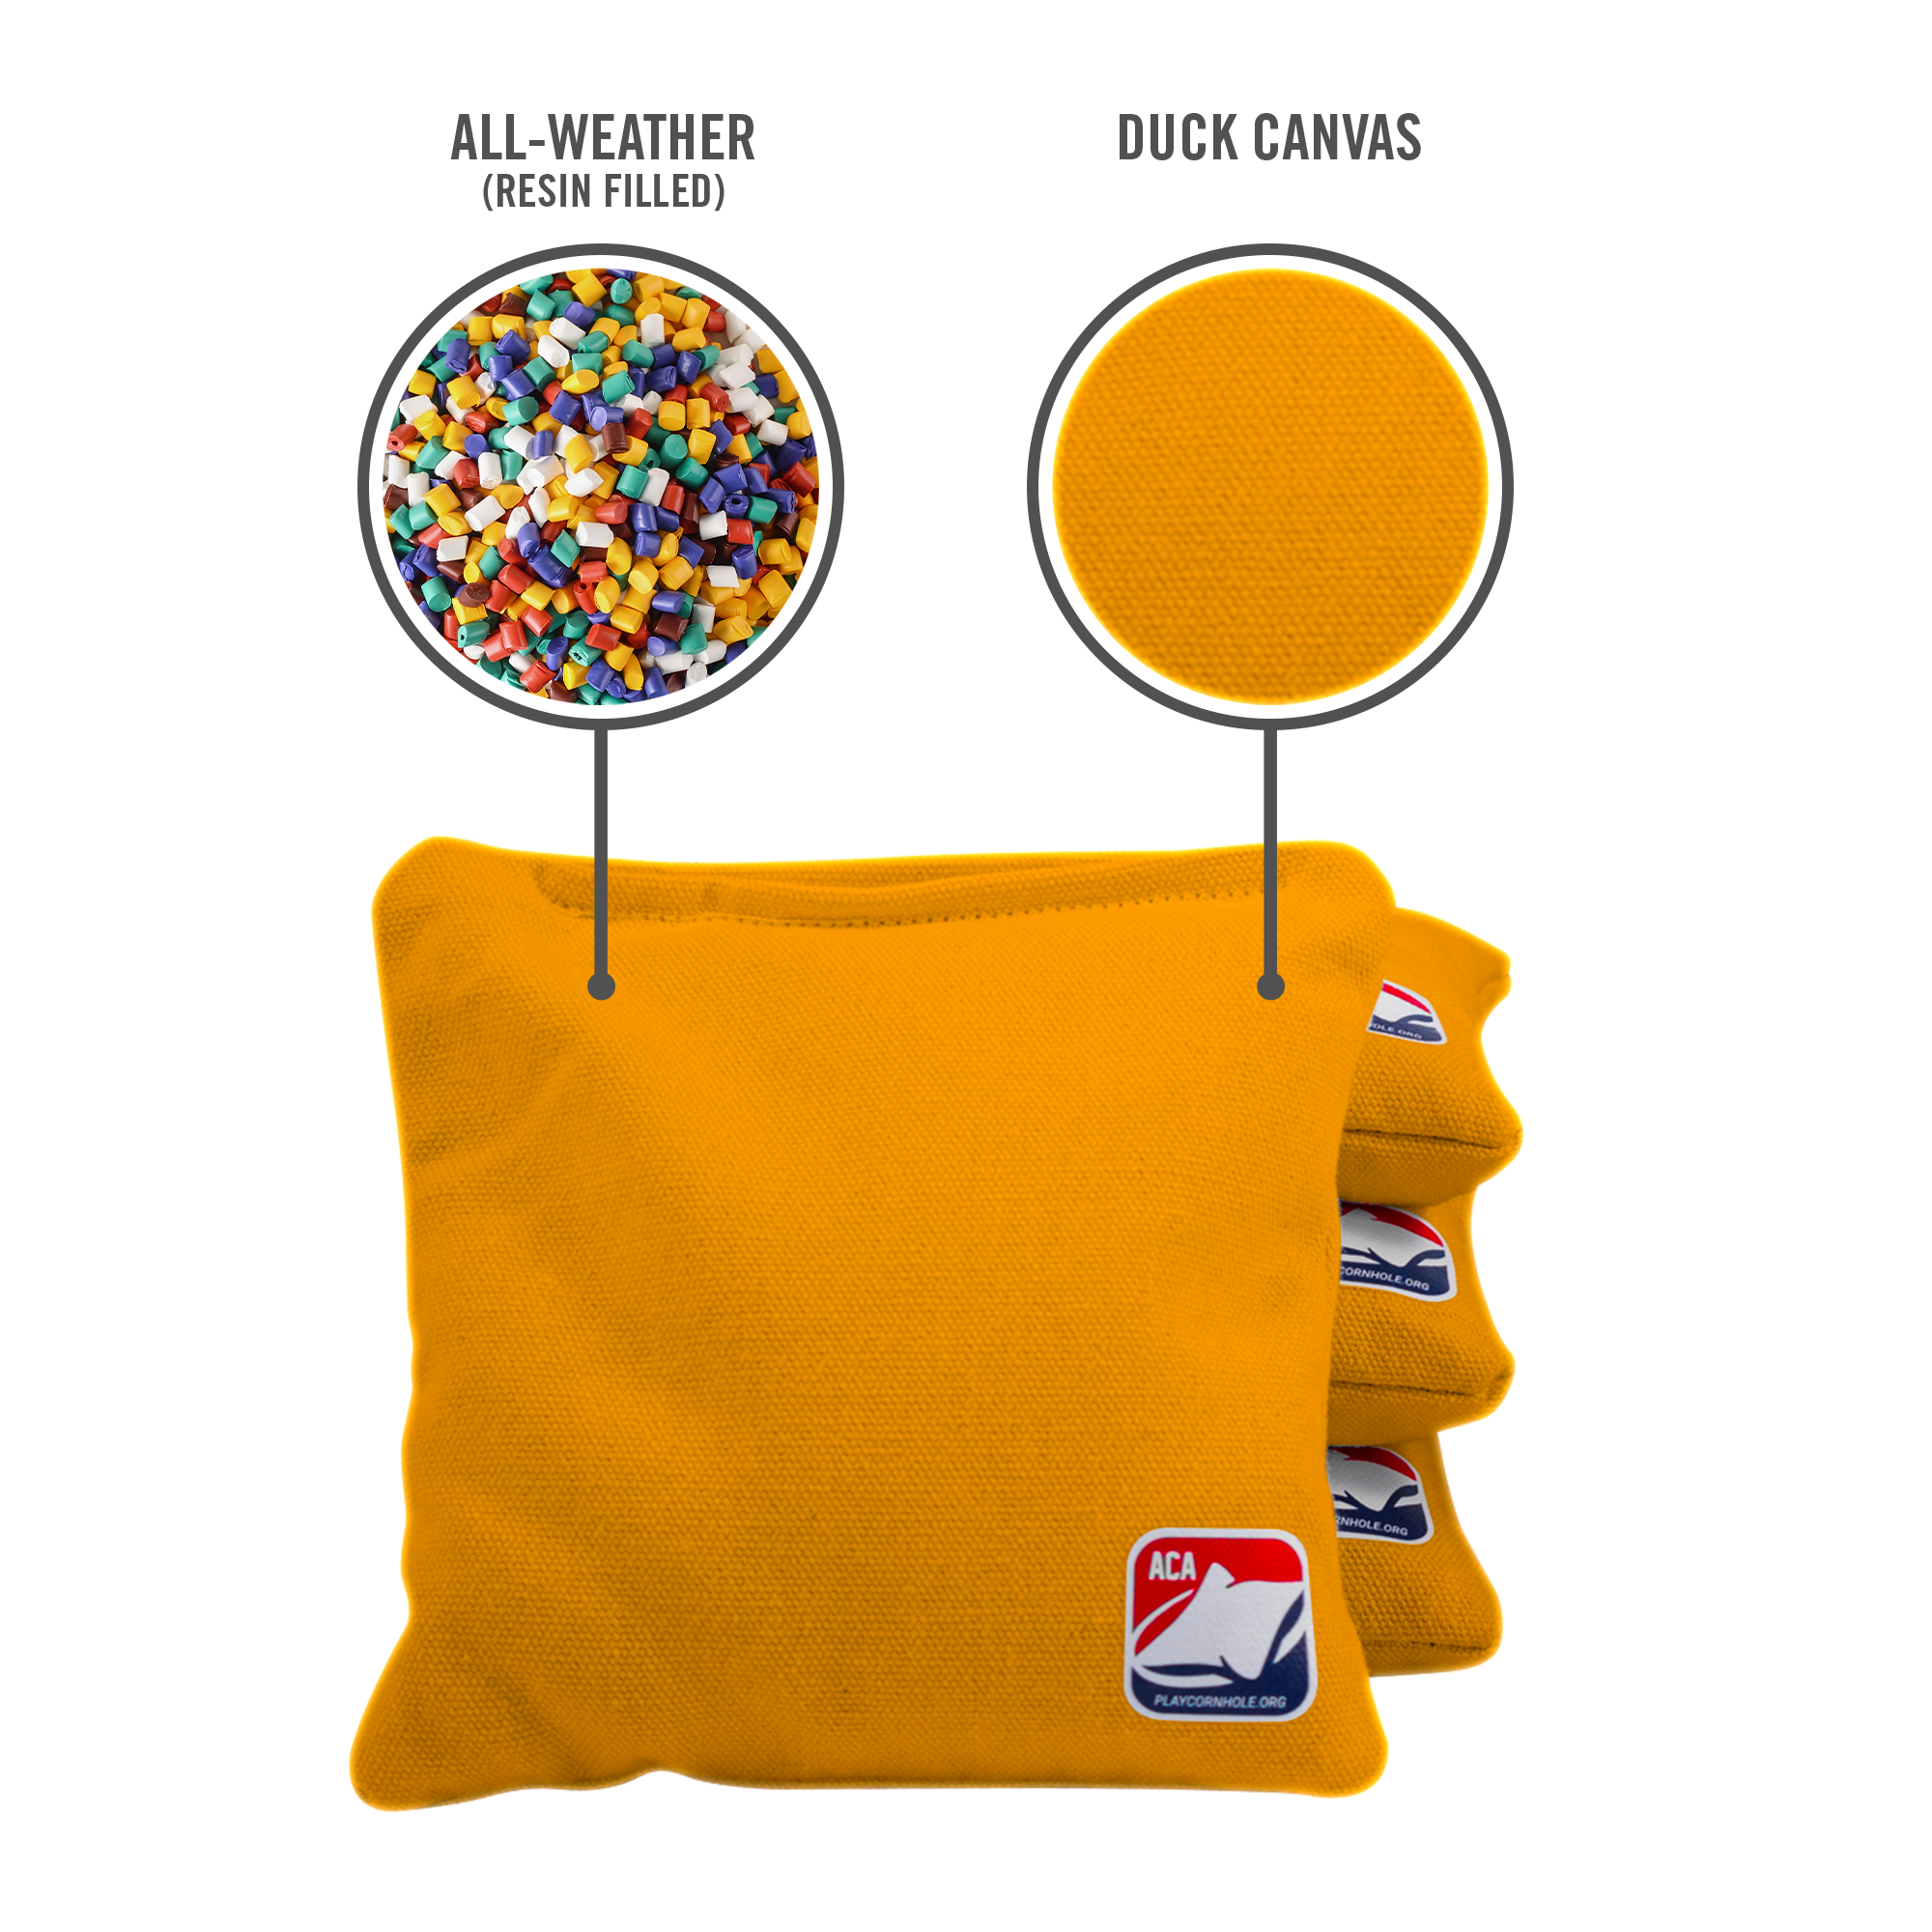 6-in Daily 66x Yellow Competition Regulation Cornhole Bags